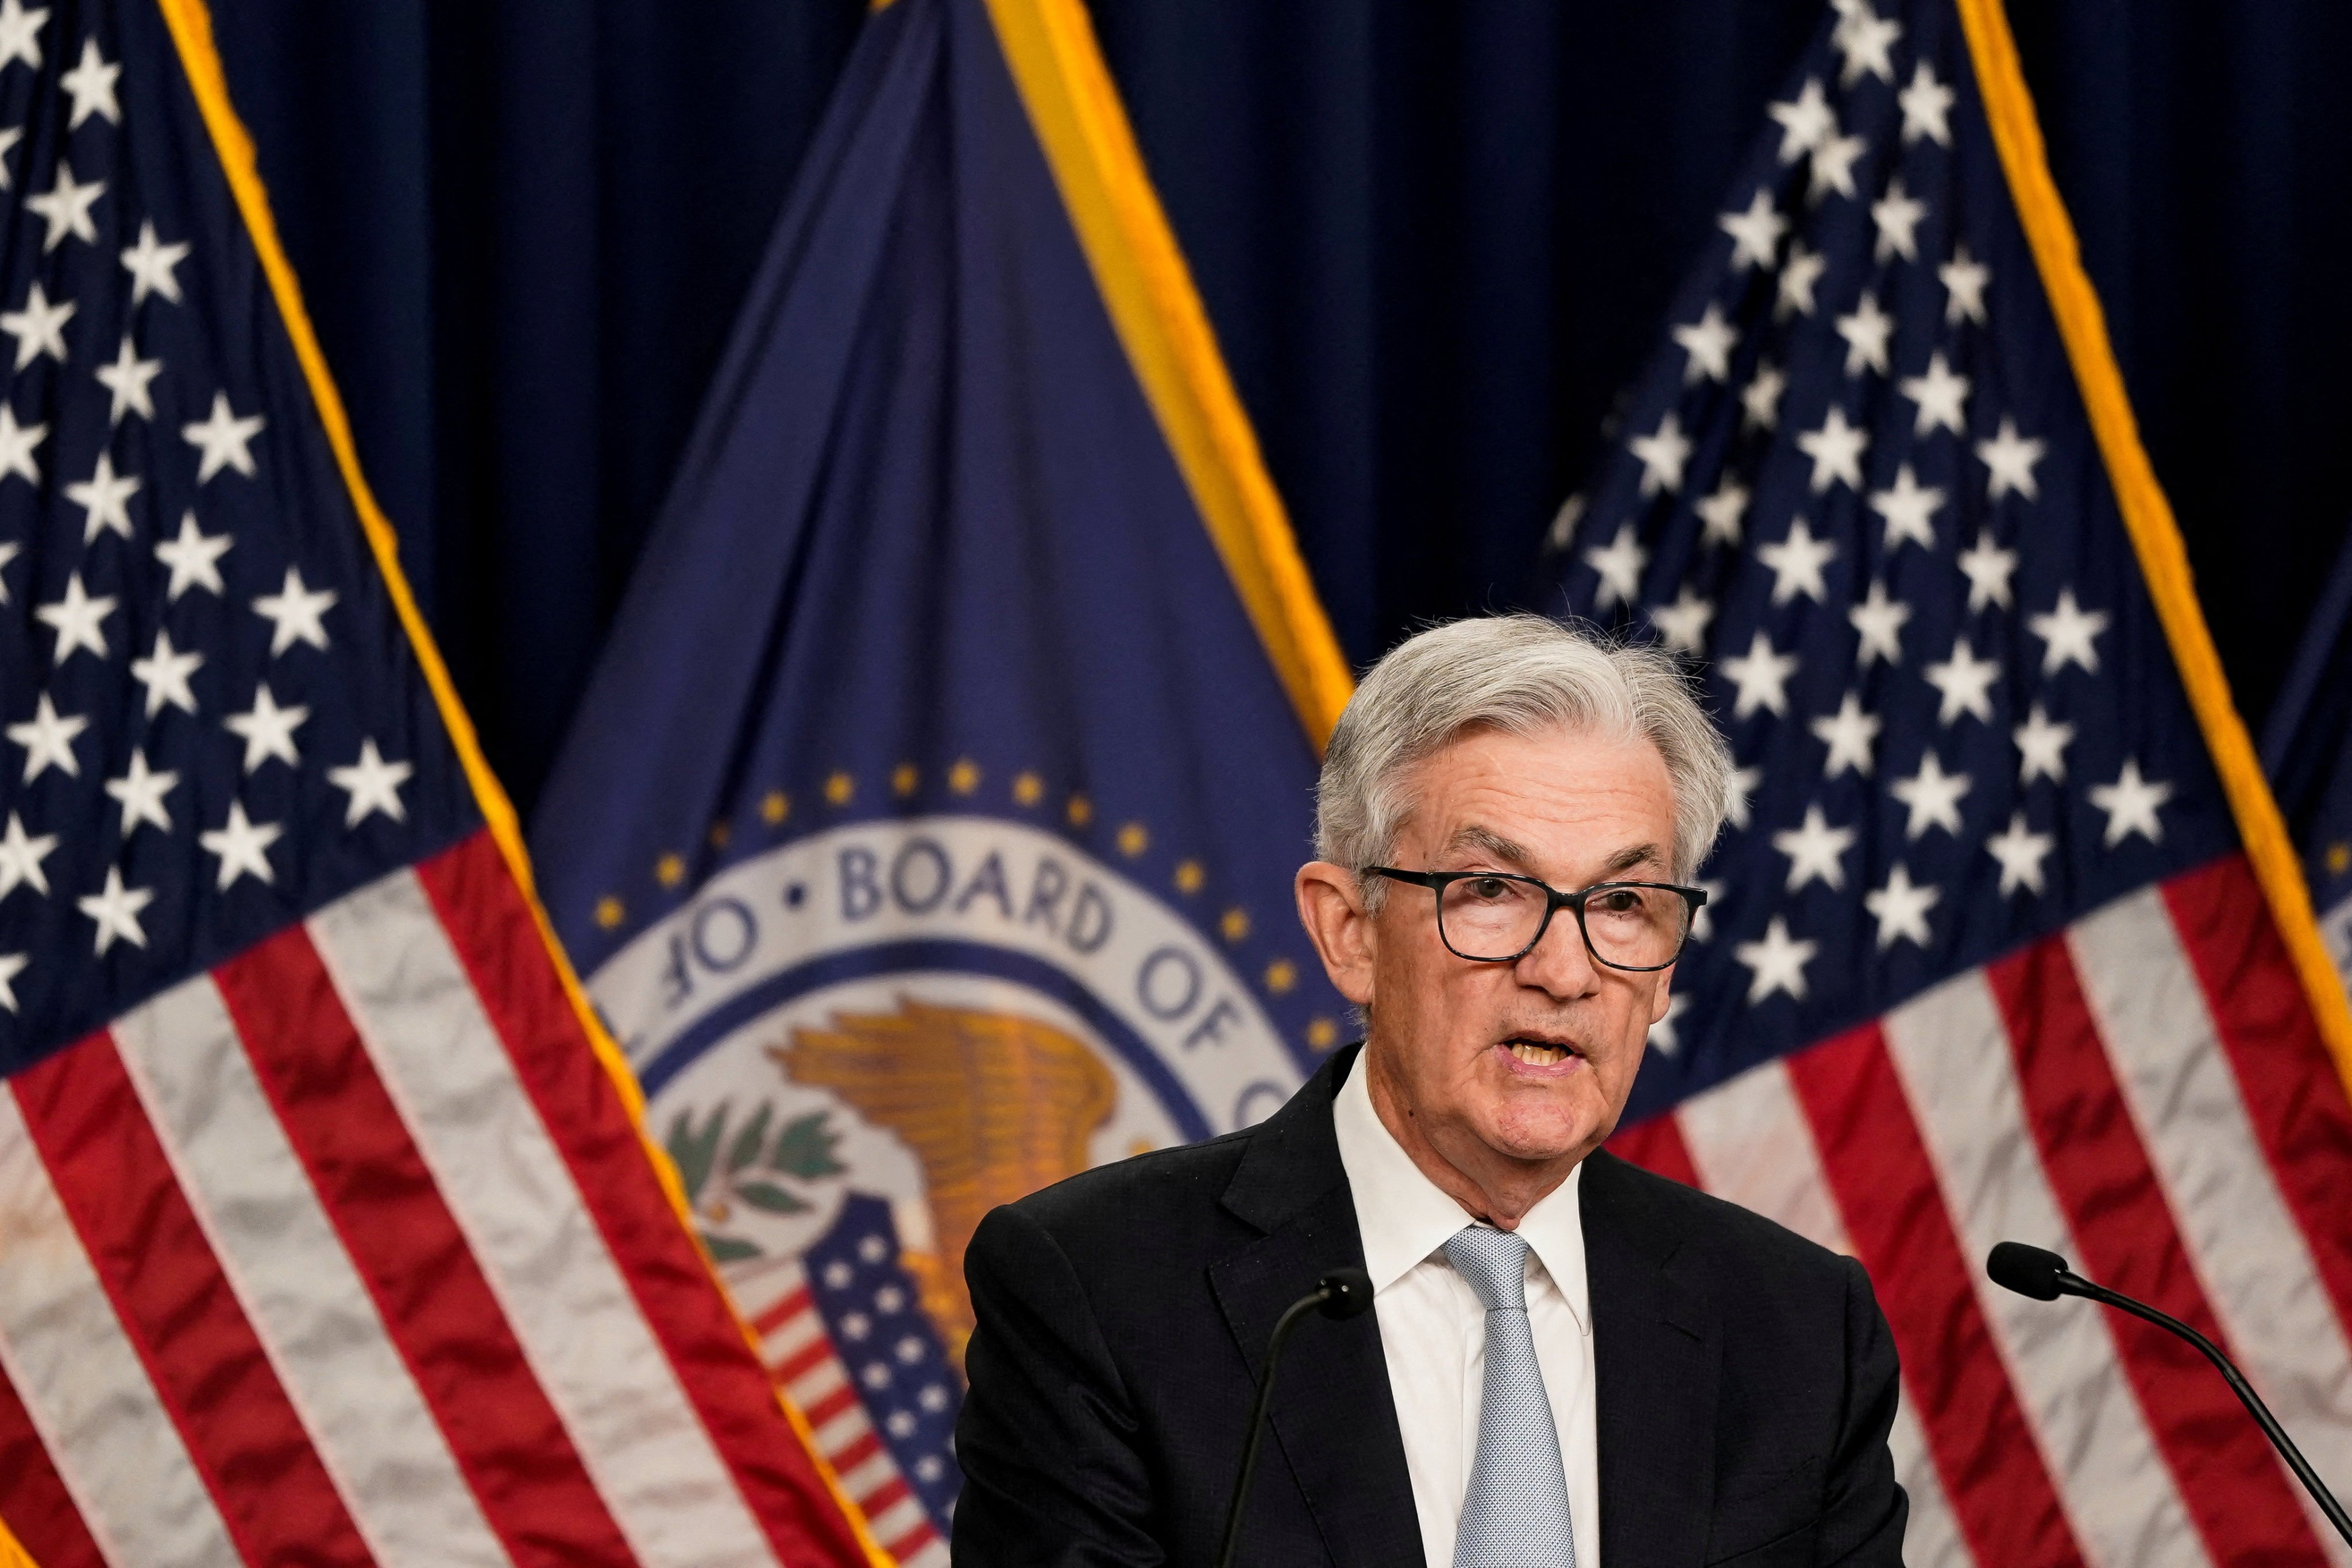 Federal Reserve Chairman Jerome Powell speaks to press in Washington following the last Federal Open Market Committee on interest rate policy on November 2. The committee is meeting again this week. Photo: Reuters